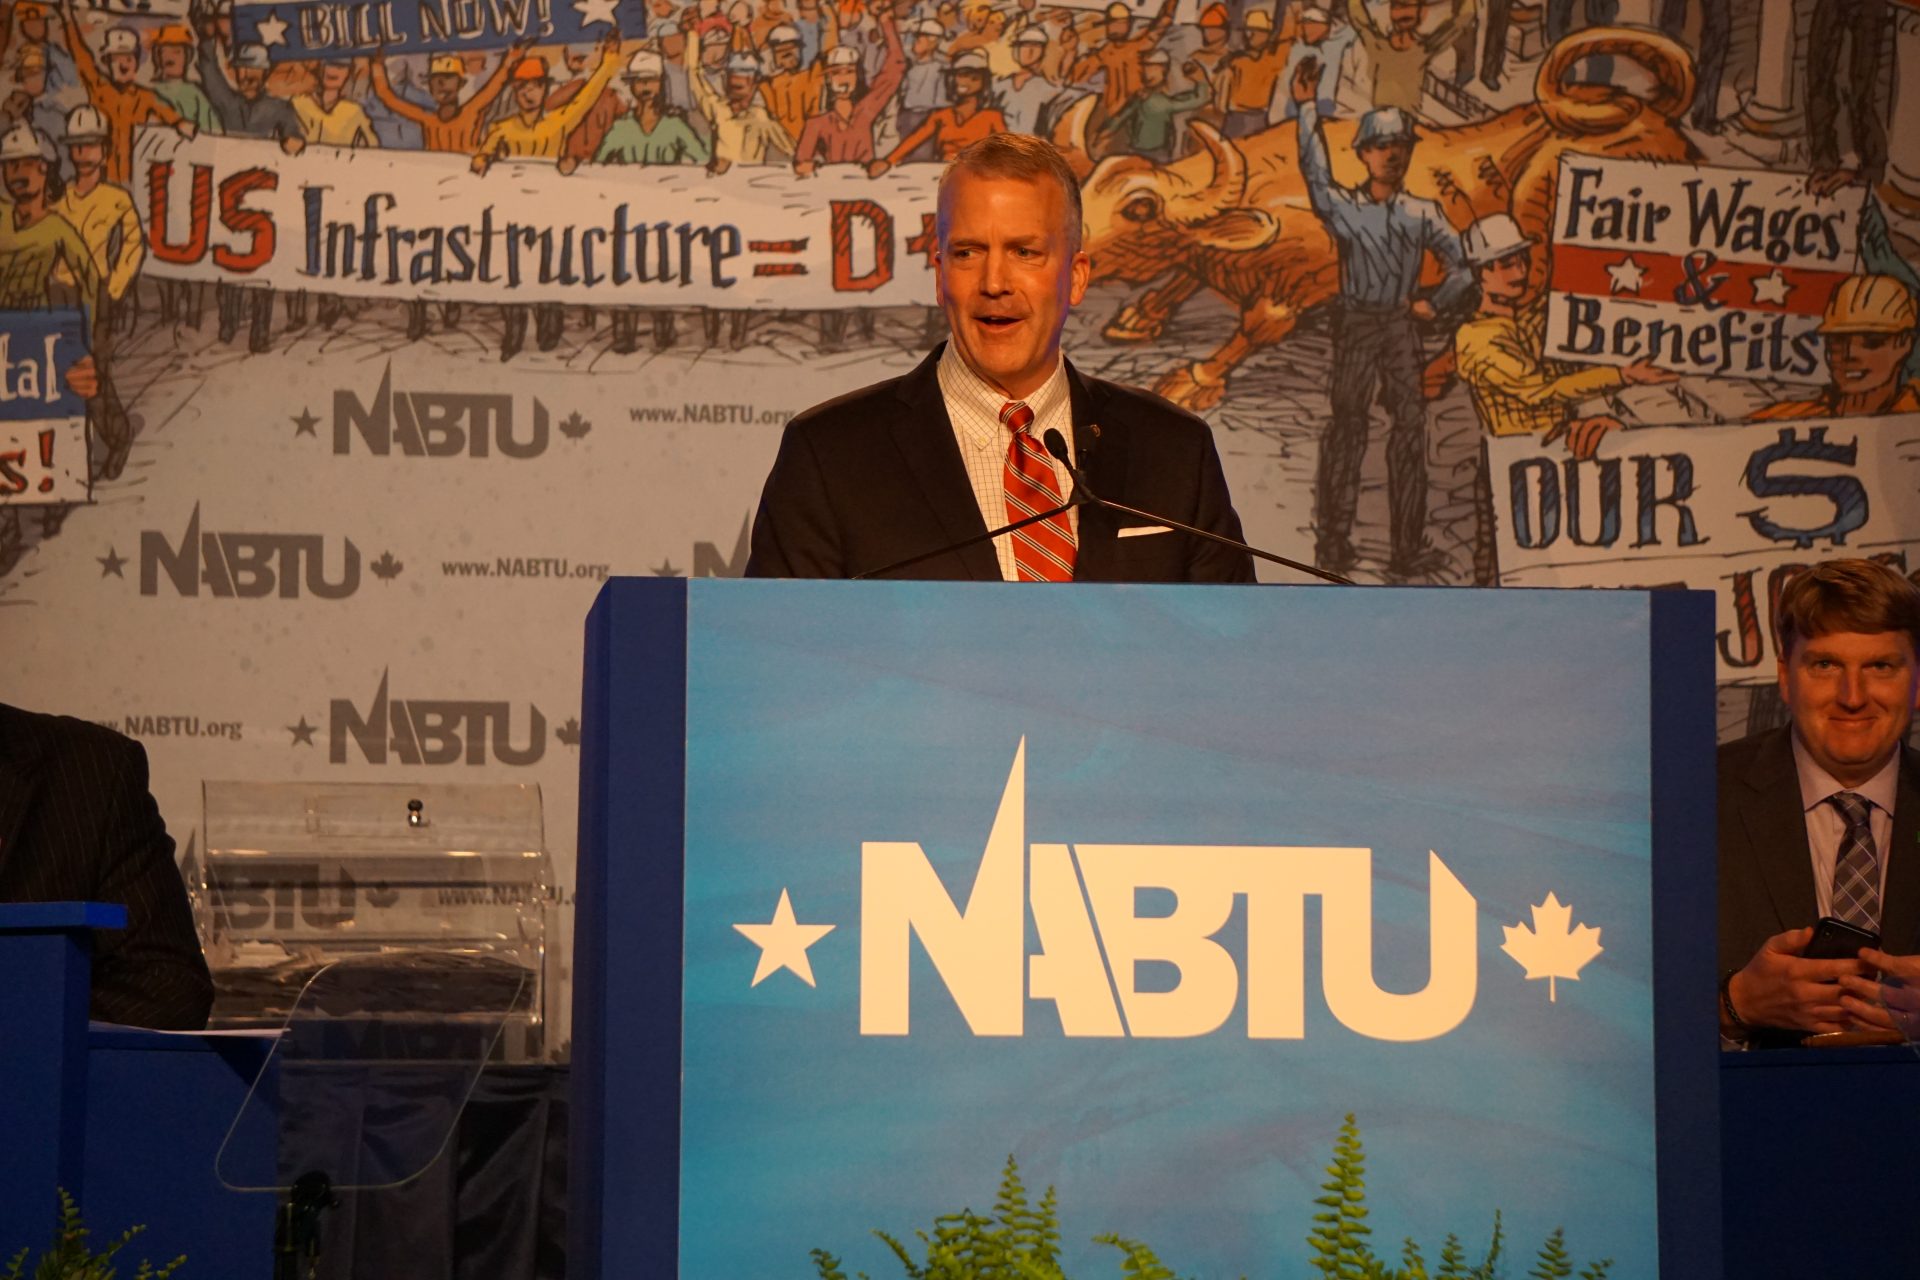 Image from the Gallery: North America’s Building Trades Unions: NABTU – Washington, D.C.